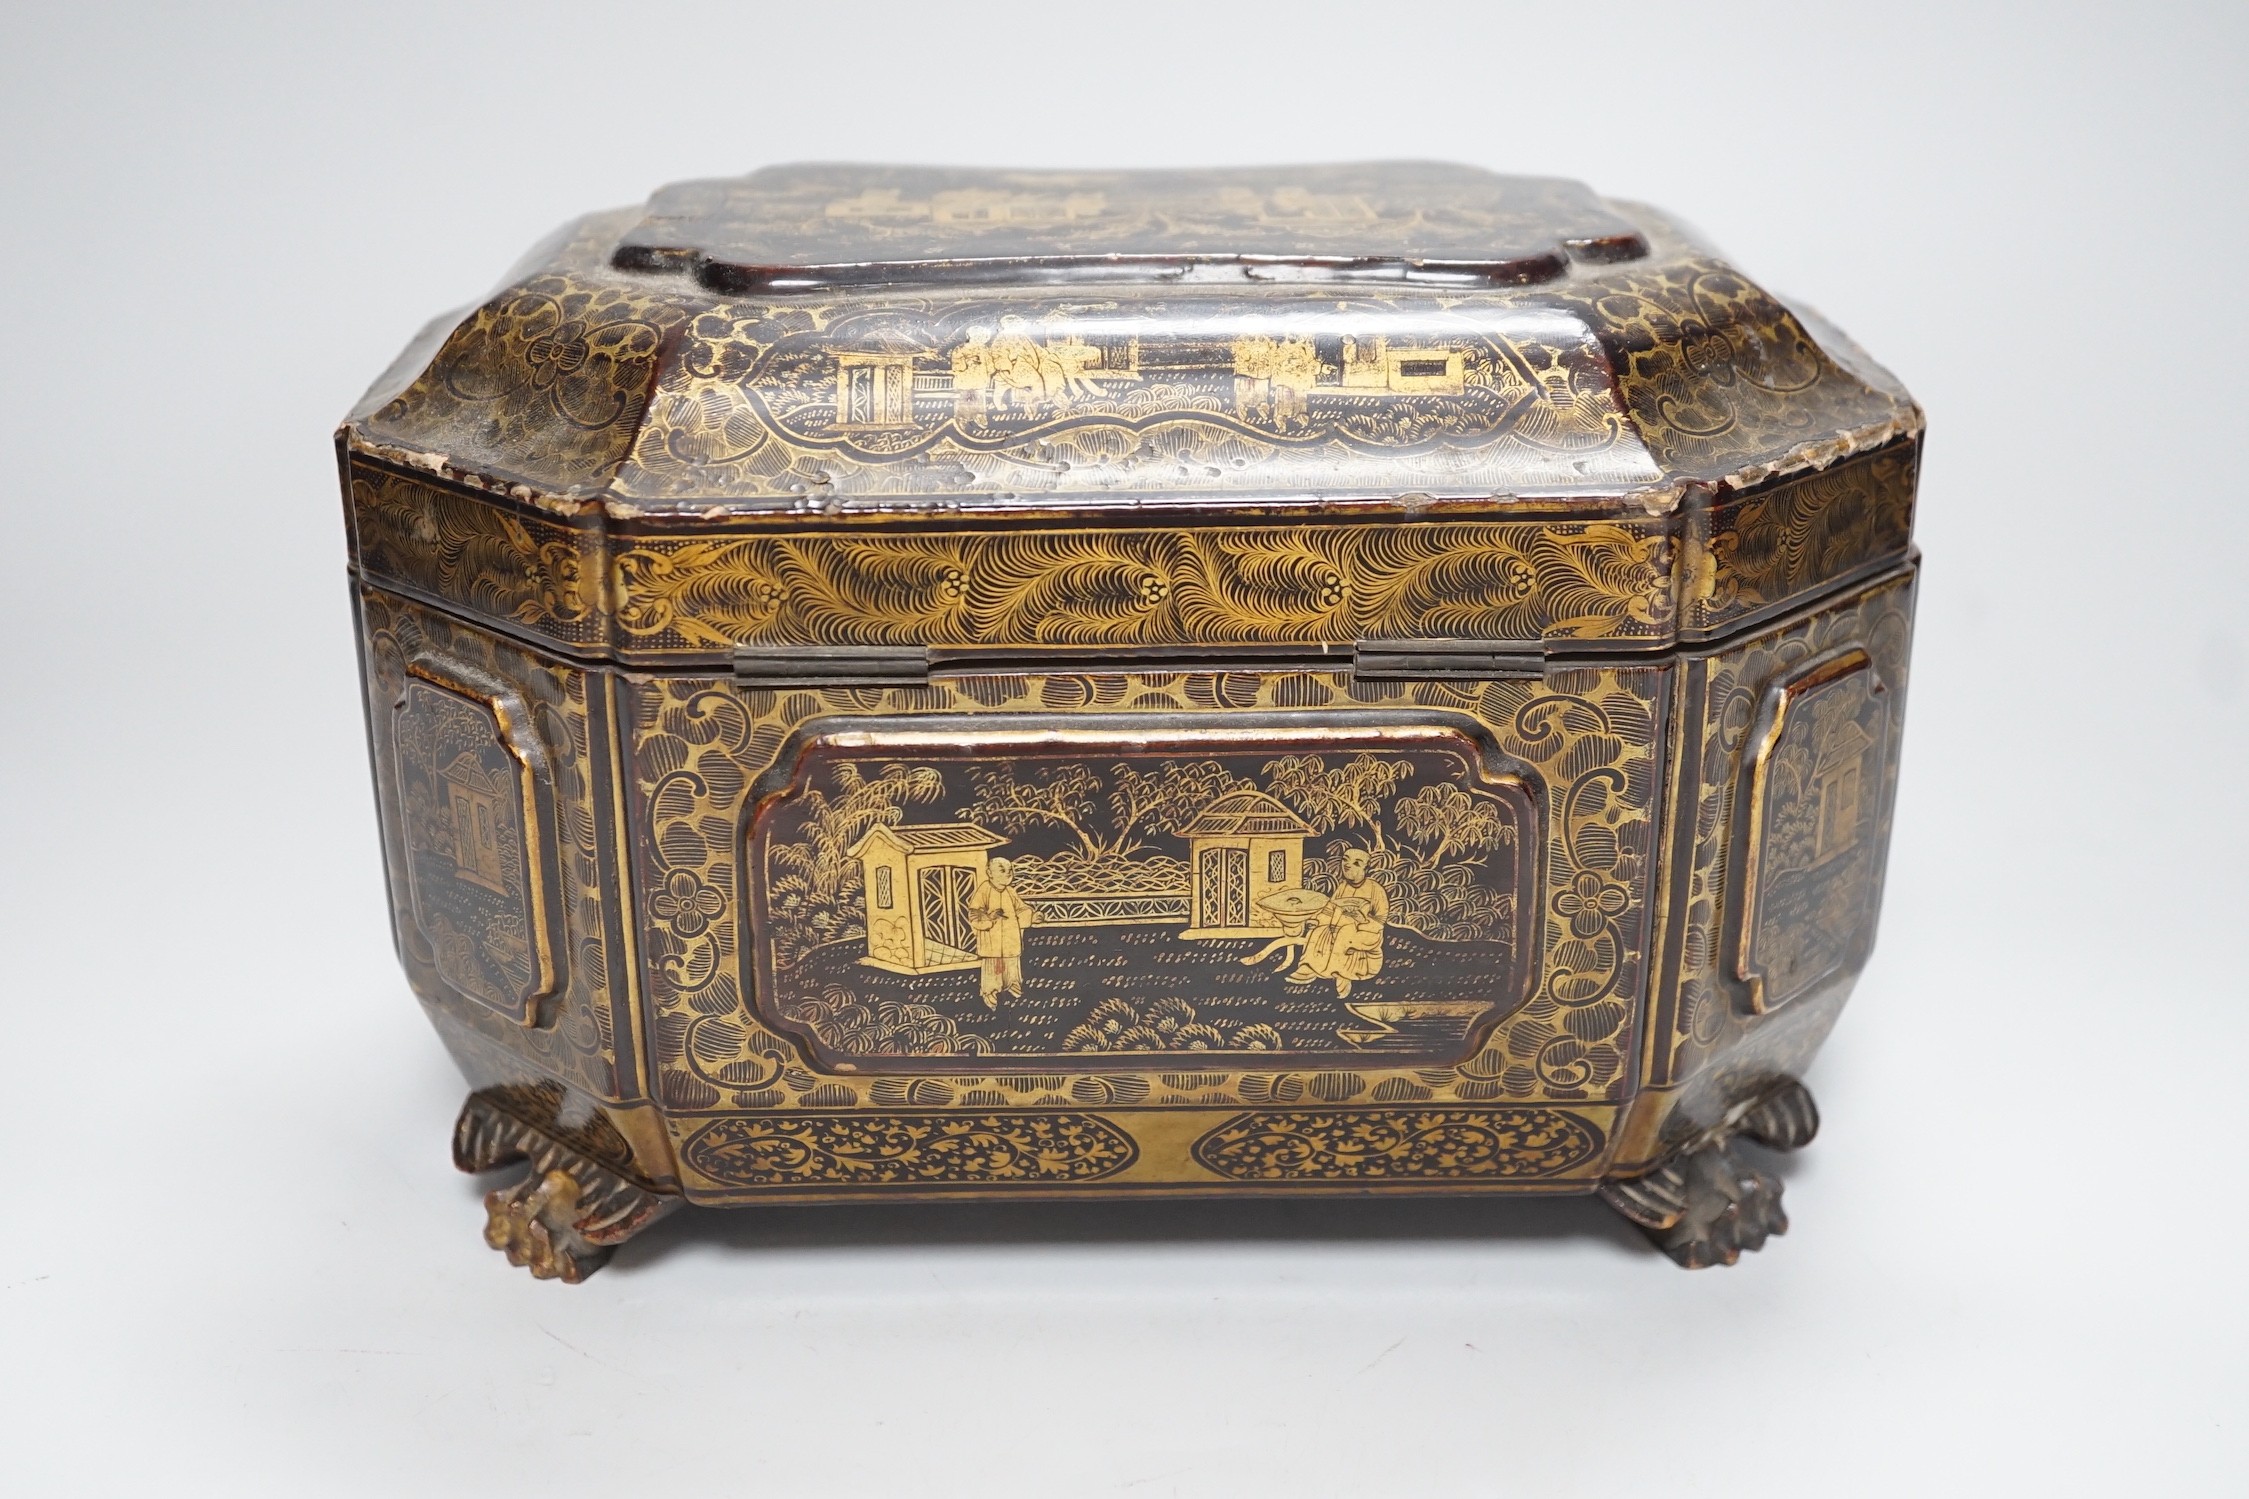 A 19th century Chinese chinoiserie lacquered sarcophagus form tea caddy, pewter lined interior - Image 4 of 6